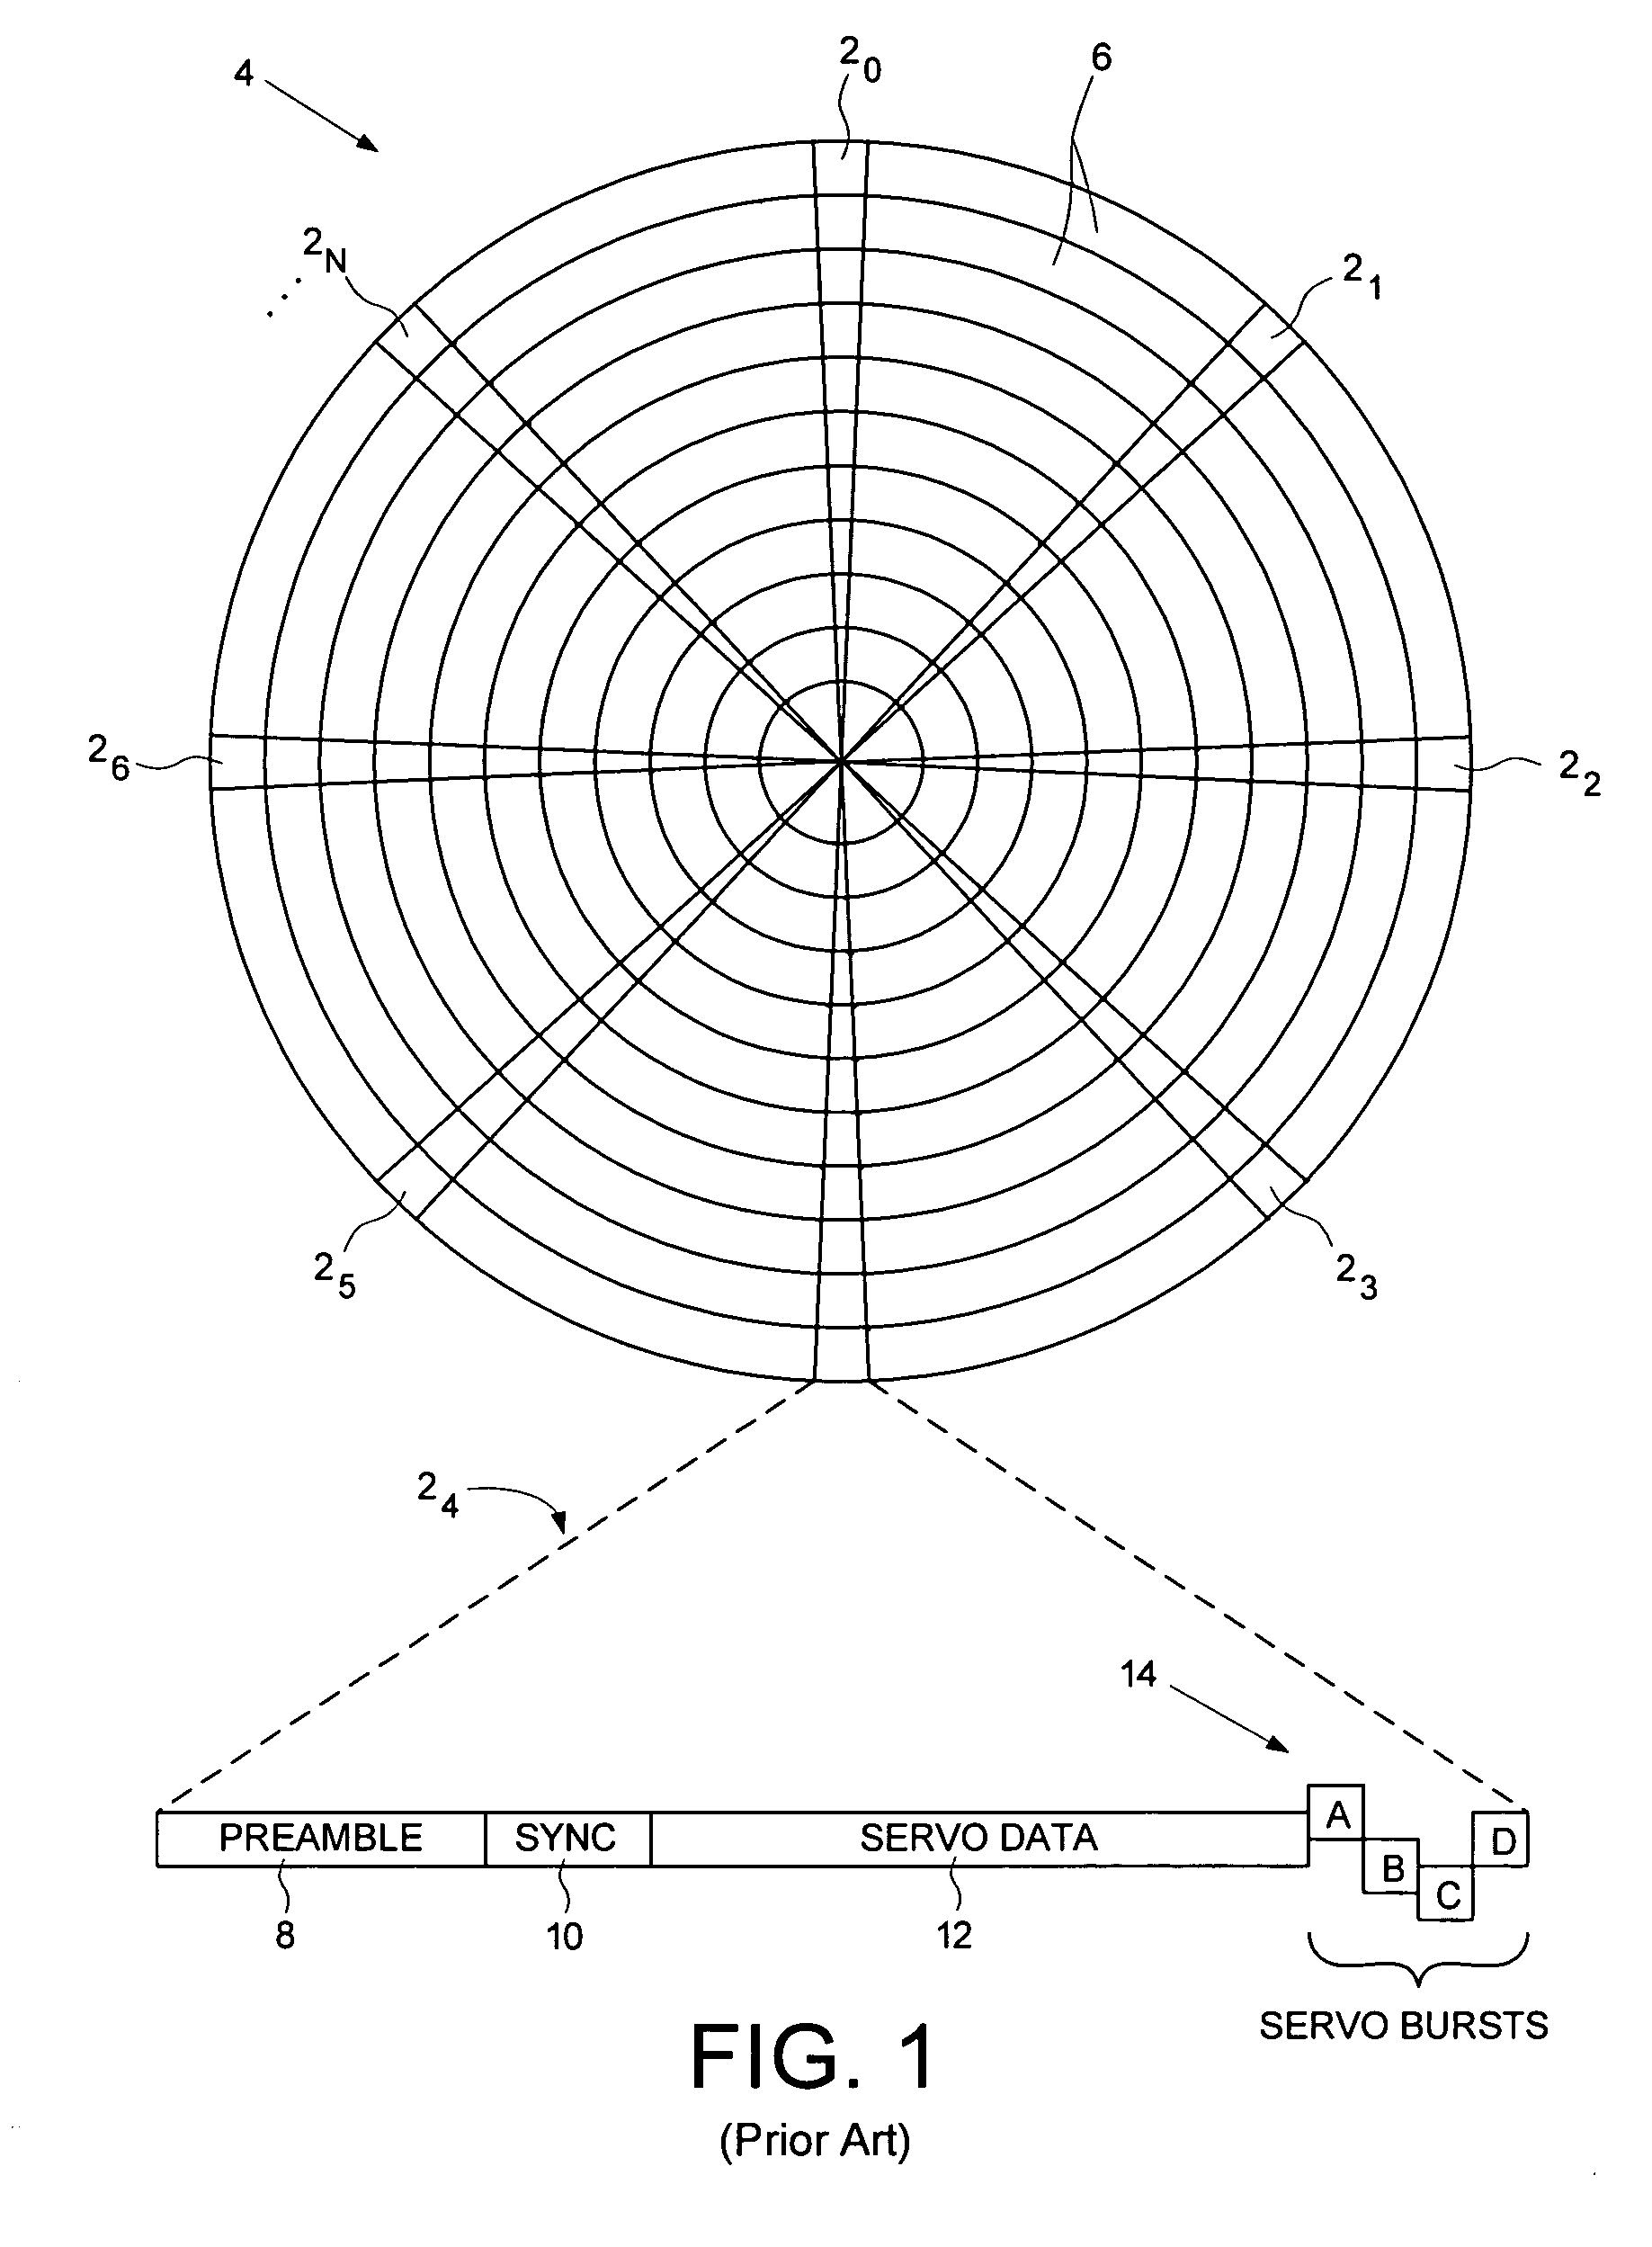 Adjusting track density over disk radius by changing slope of spiral tracks used to servo write a disk drive